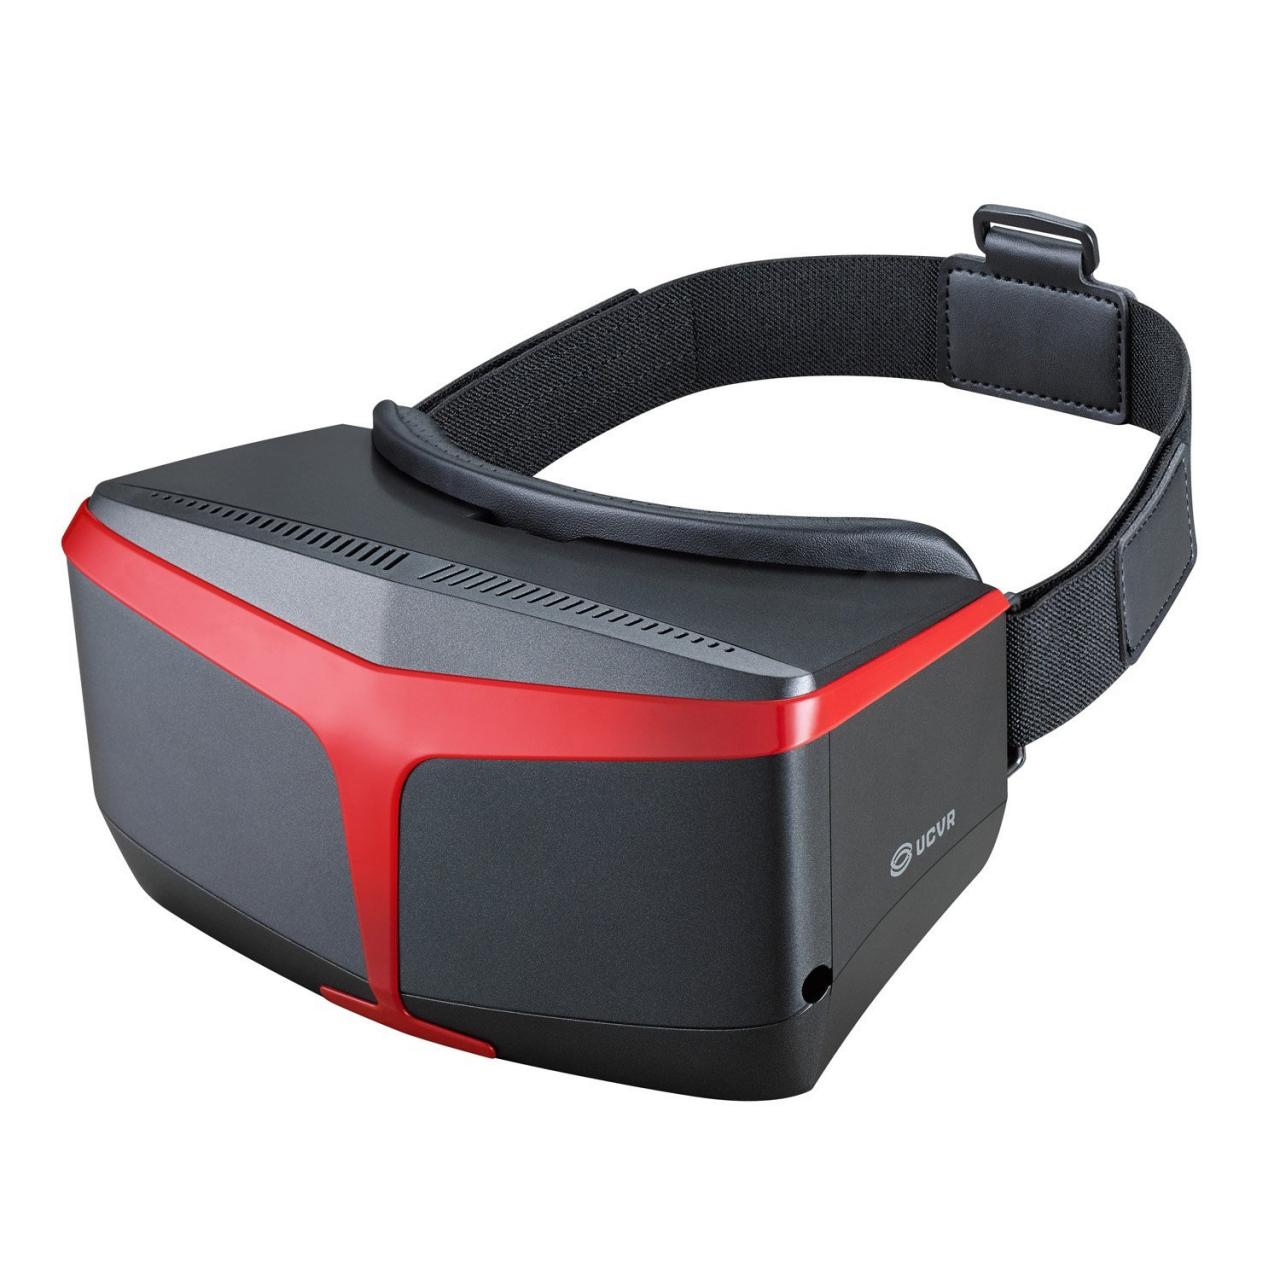 Top 10 Best Virtual Reality (VR) Headsets to Buy